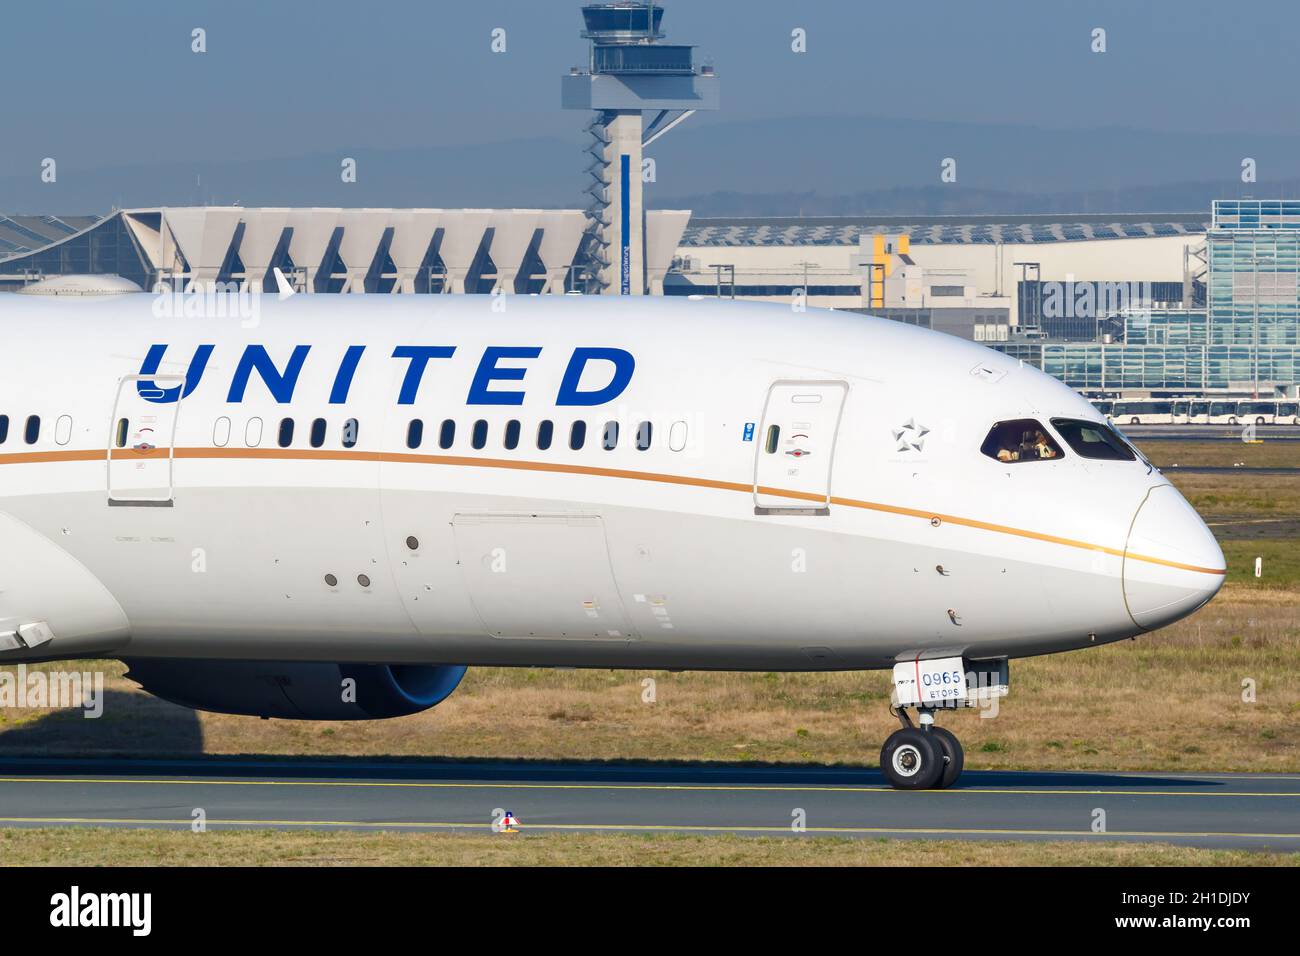 Frankfurt, Germany – April 7, 2020: United Airlines Boeing 787-9 Dreamliner airplane at Frankfurt airport (FRA) in Germany. Boeing is an American airc Stock Photo